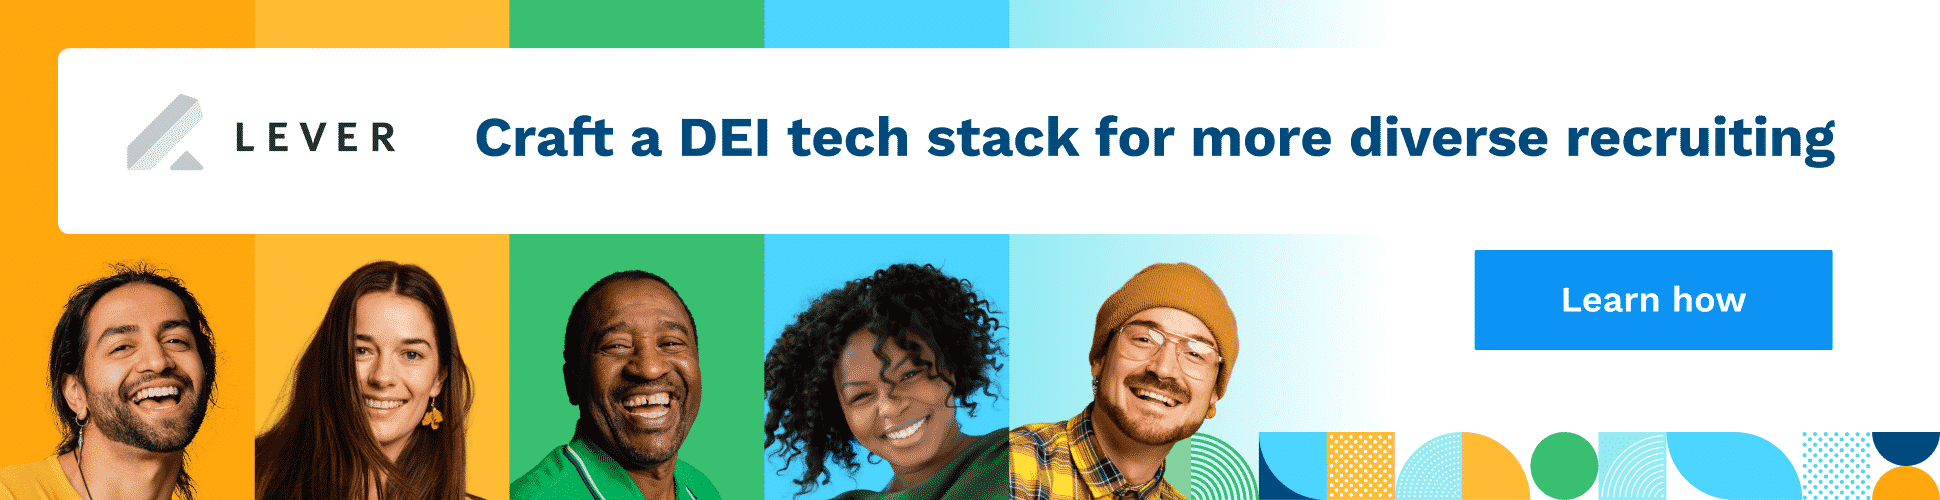 how to build a dei tech stack